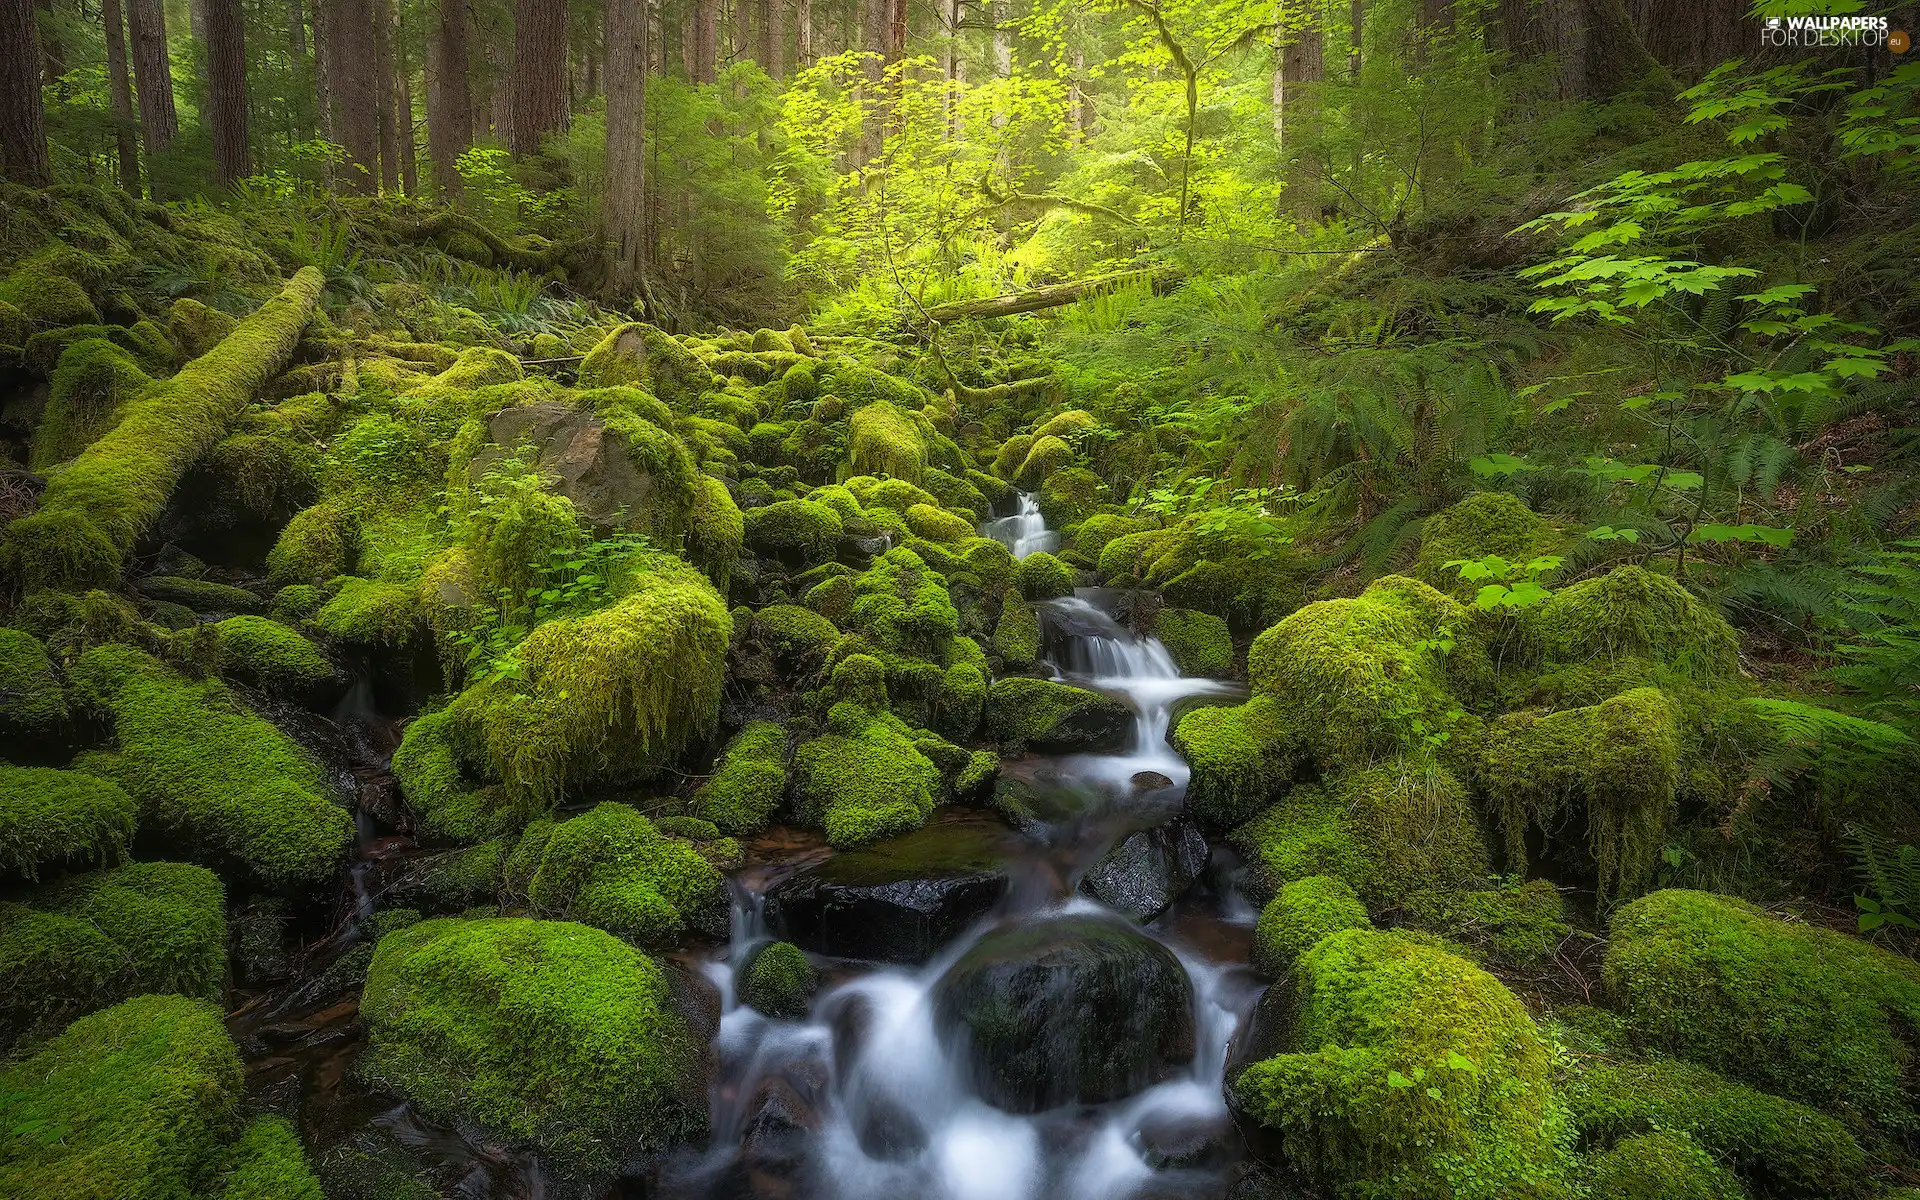 Washington State, The United States, Olympic National Park, forest, Stones, Logs, River, mossy, flux